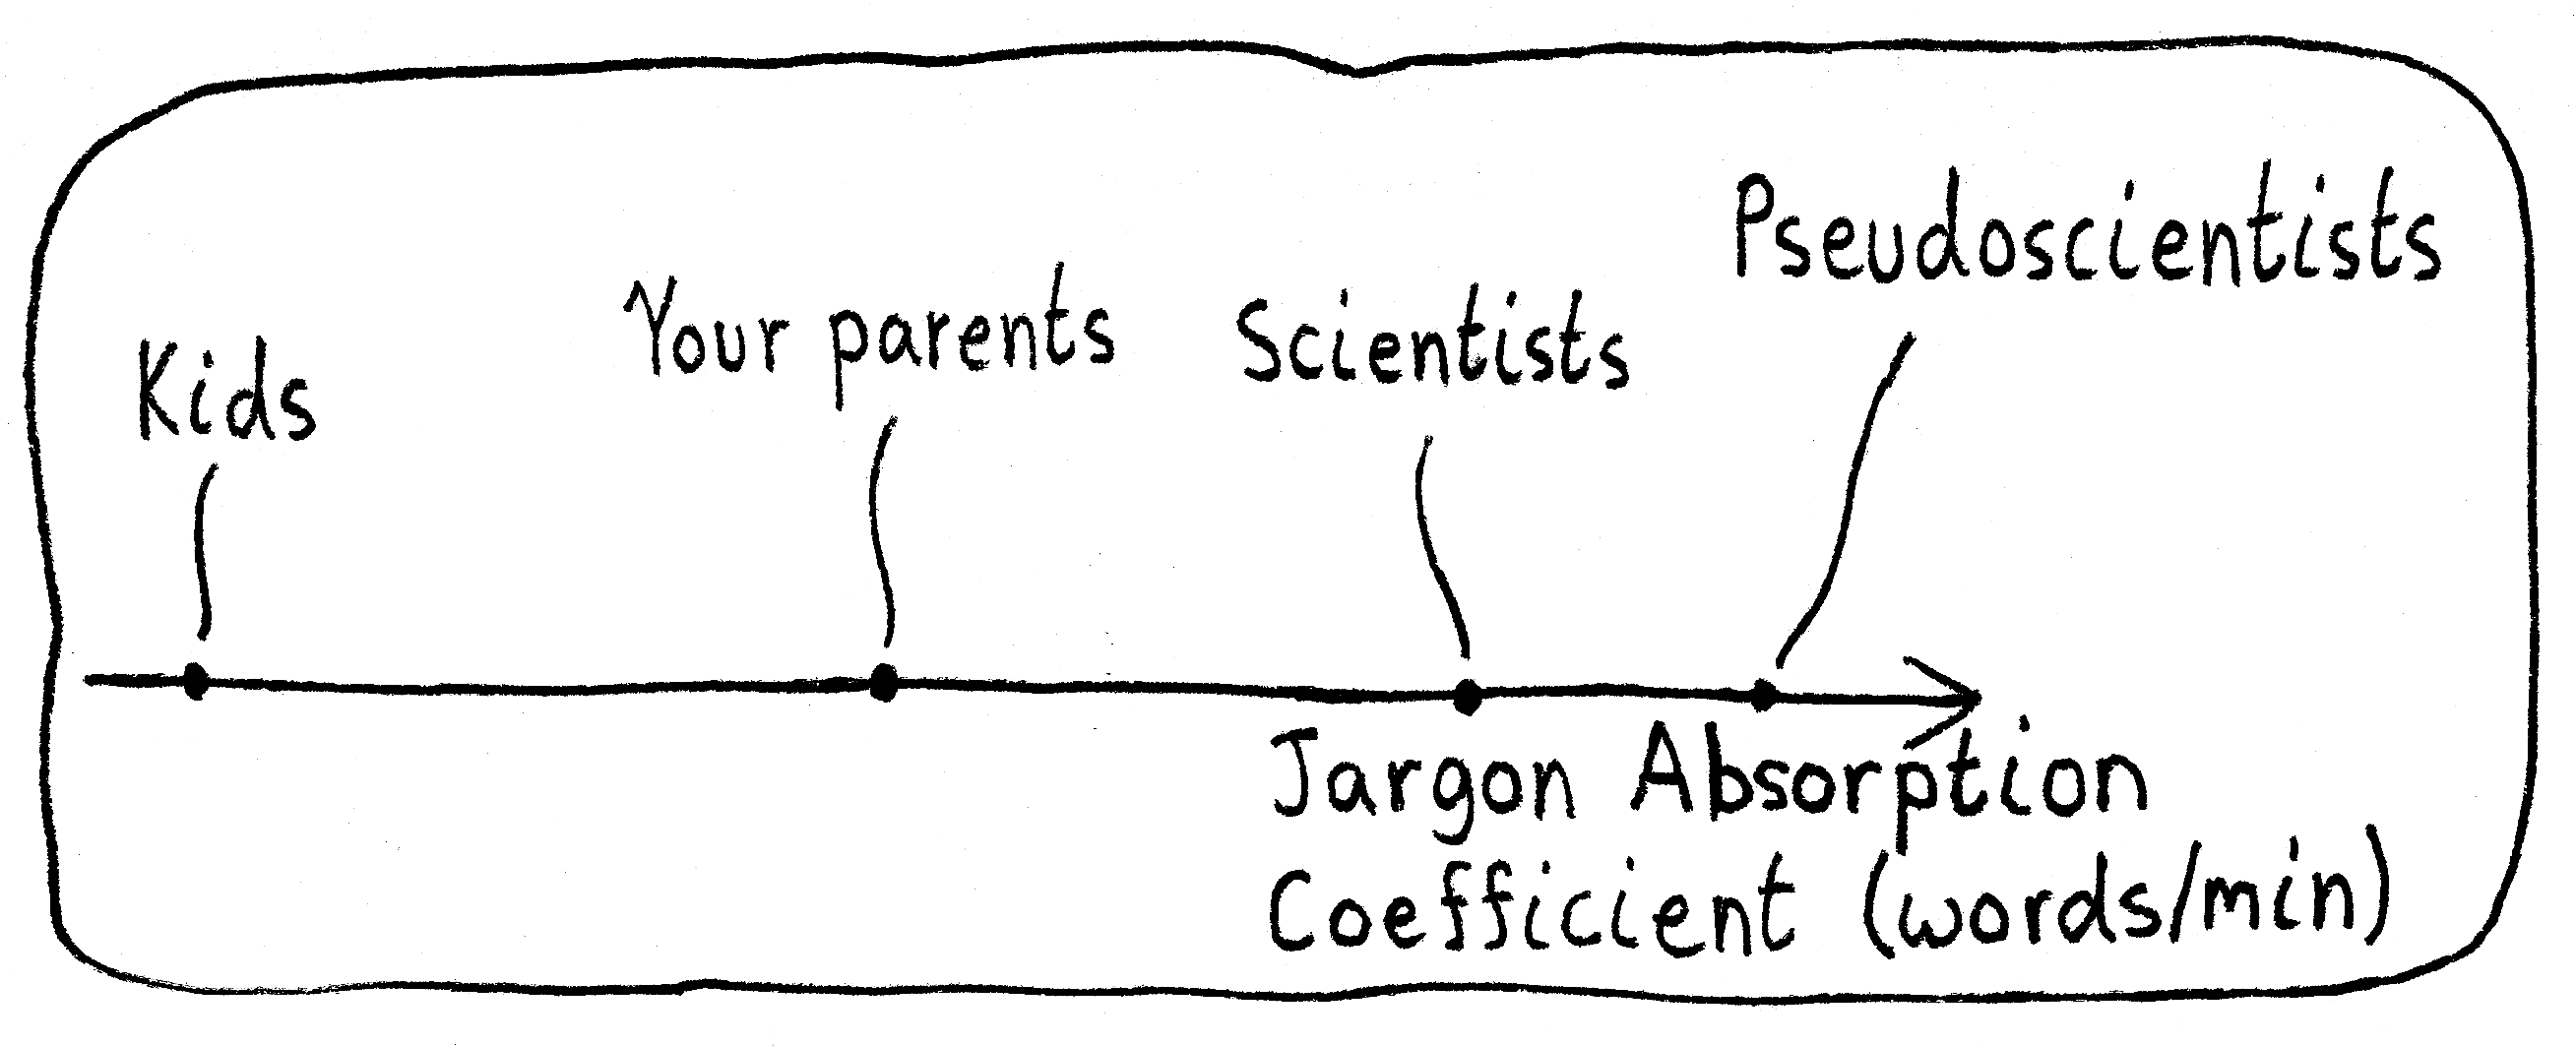 A one dimensional line labeled "Jargon Absorption Coefficient (words/min)", increasing to the right. On the left are kids, then your parents who can absorb a bit more, then scientists, and finally, pseudoscientists.